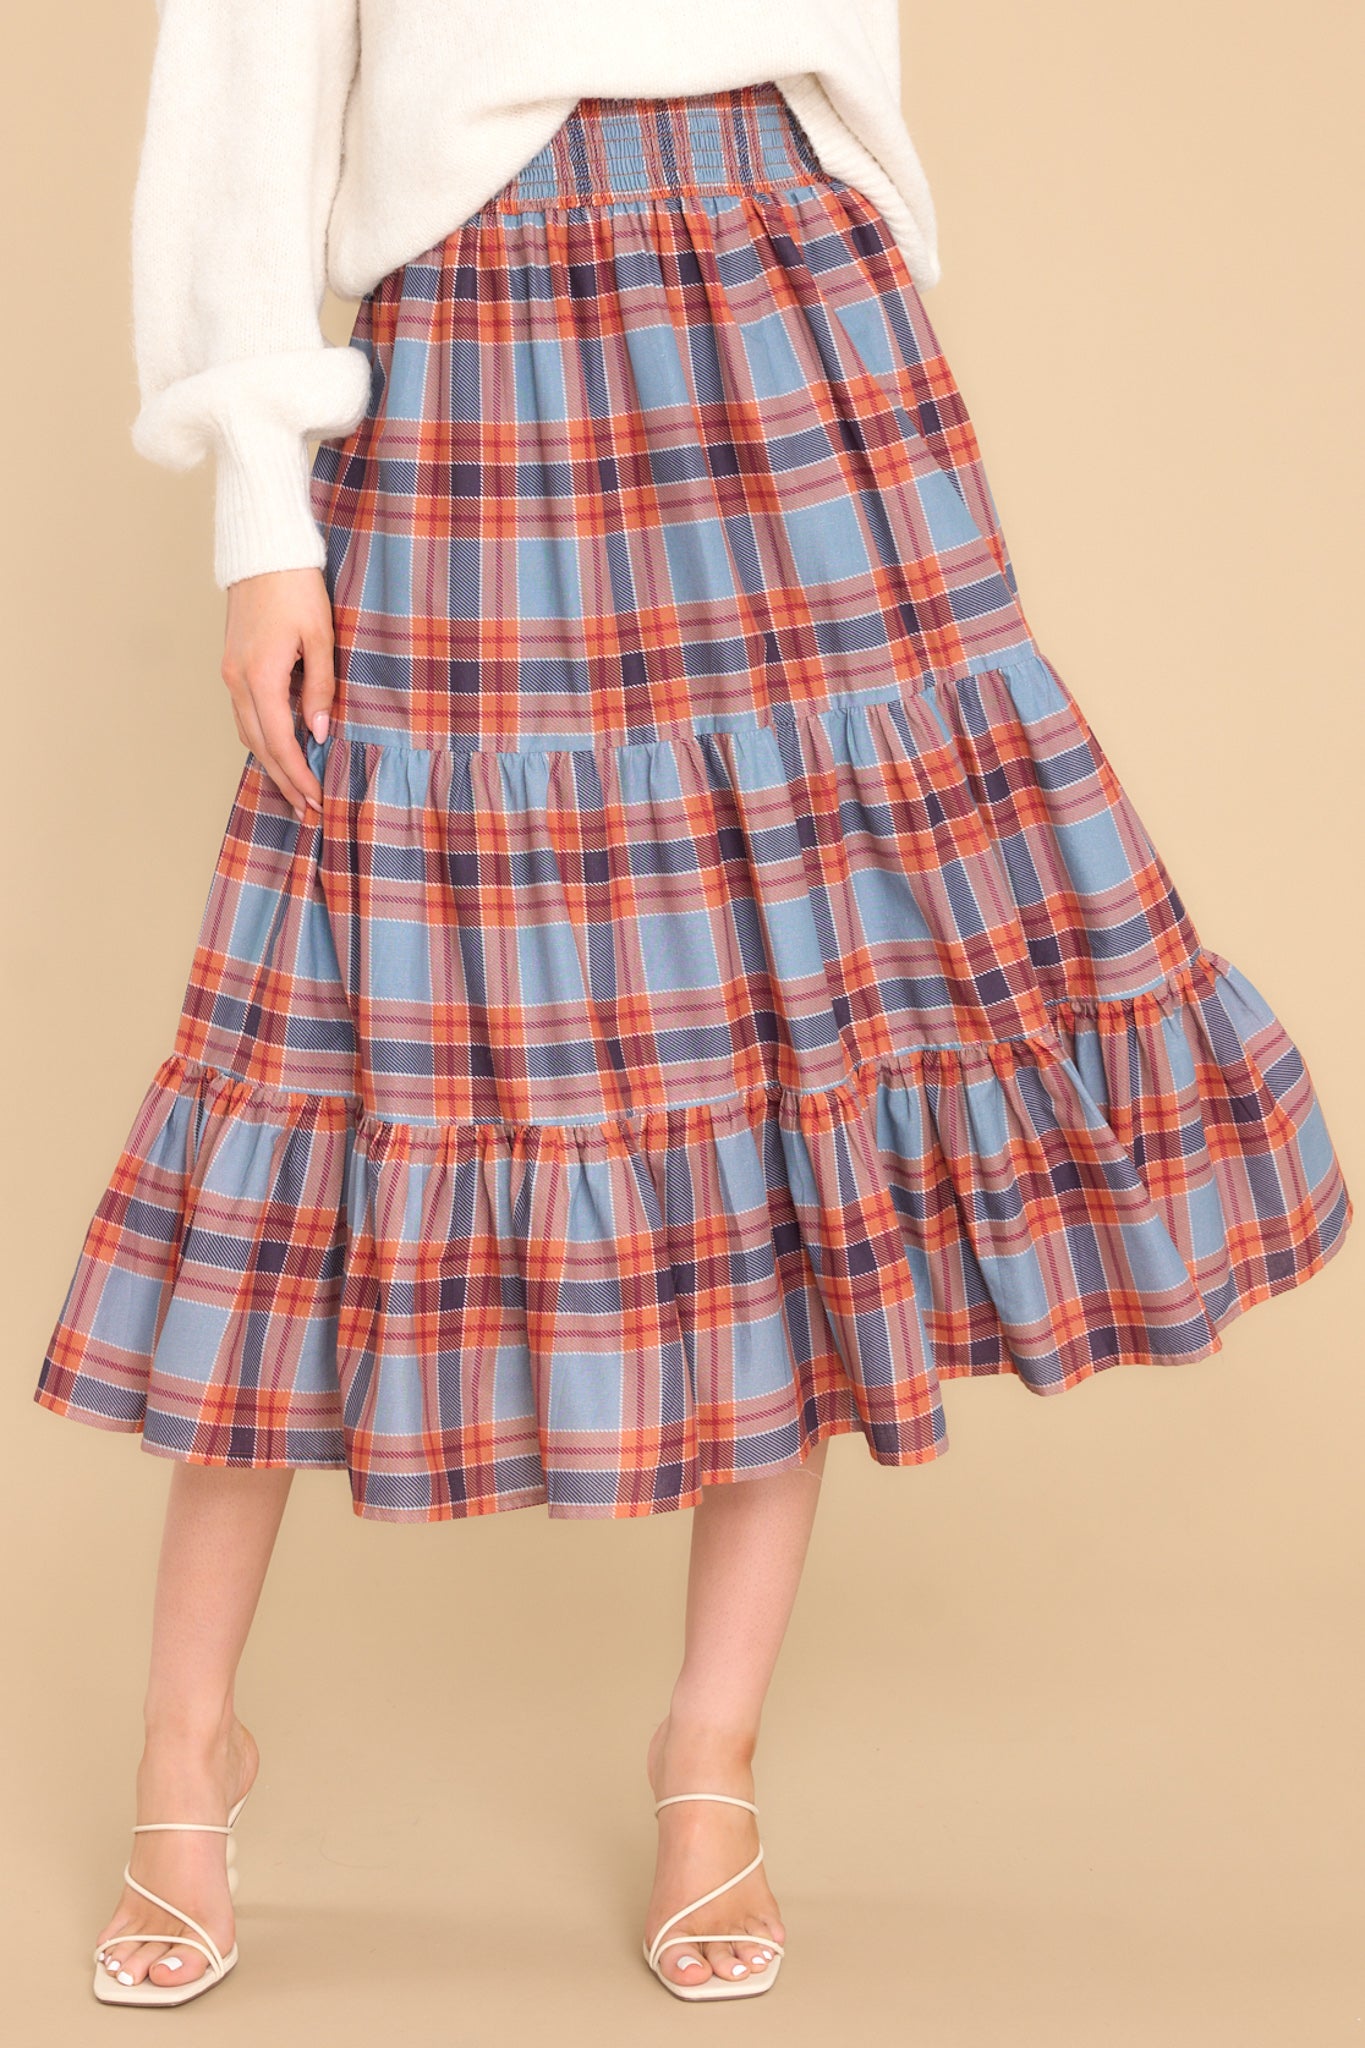 This multi-colored dress skirt features a strapless design, a smocked bust, and a flowy tiered skirt.